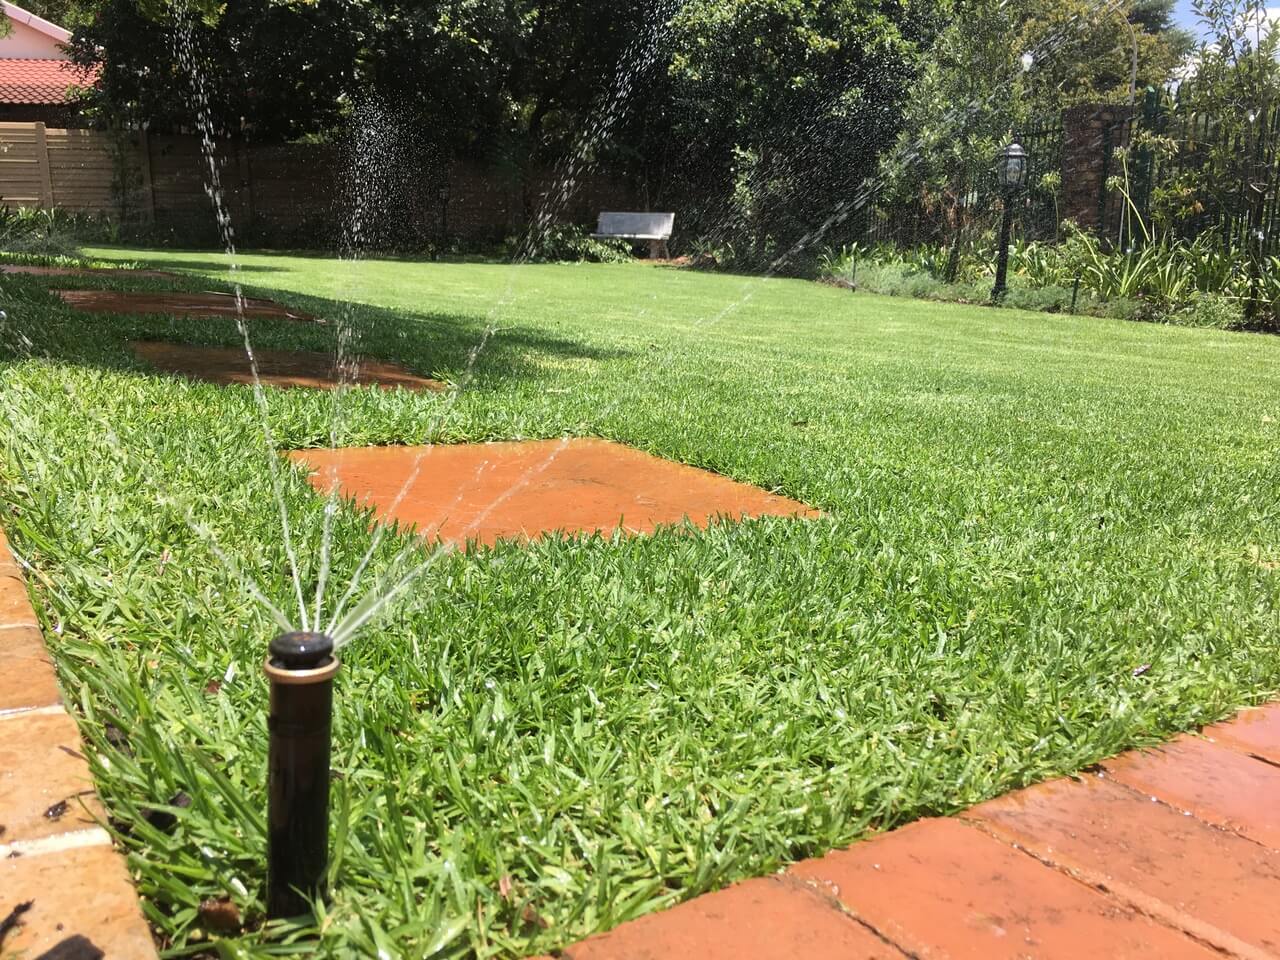 Consider a Simple Watering System